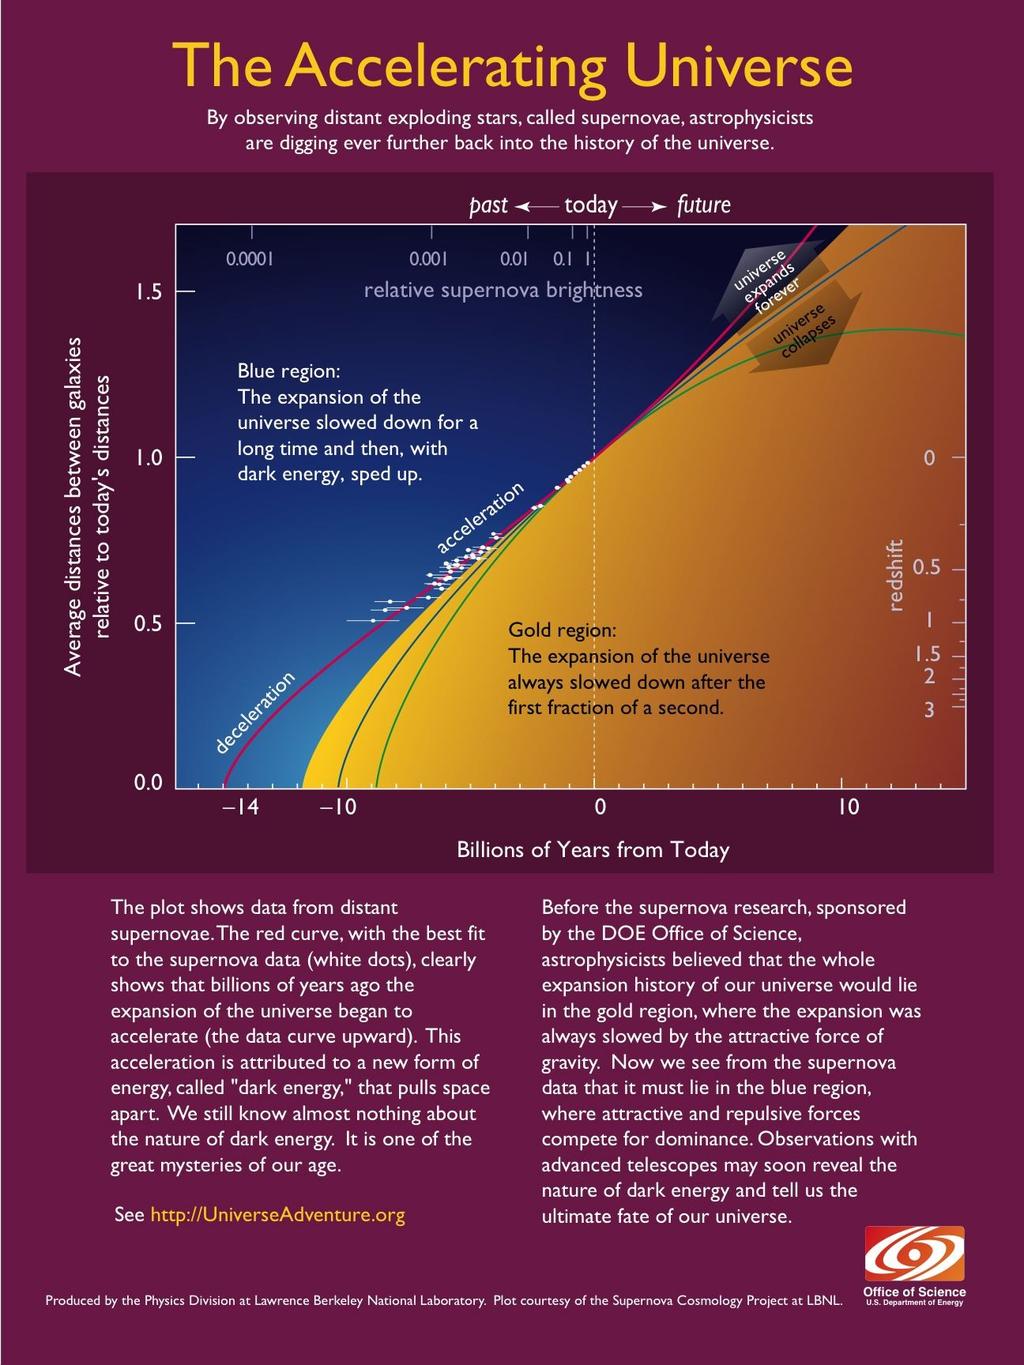 History and fate of the Universe Data from Supernova Cosmology Project